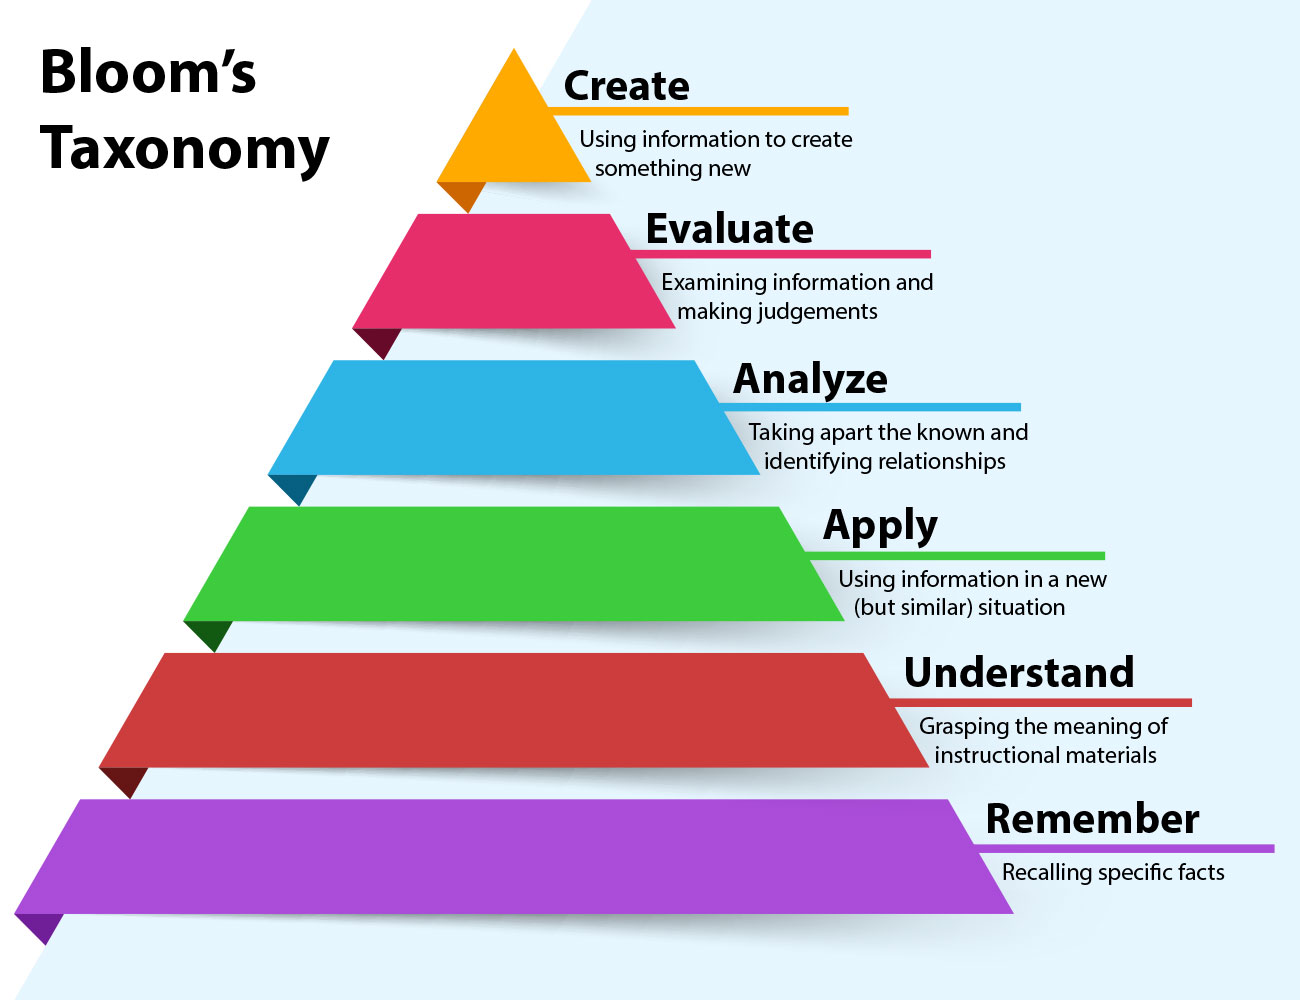 Visual of Bloom's Taxonomy